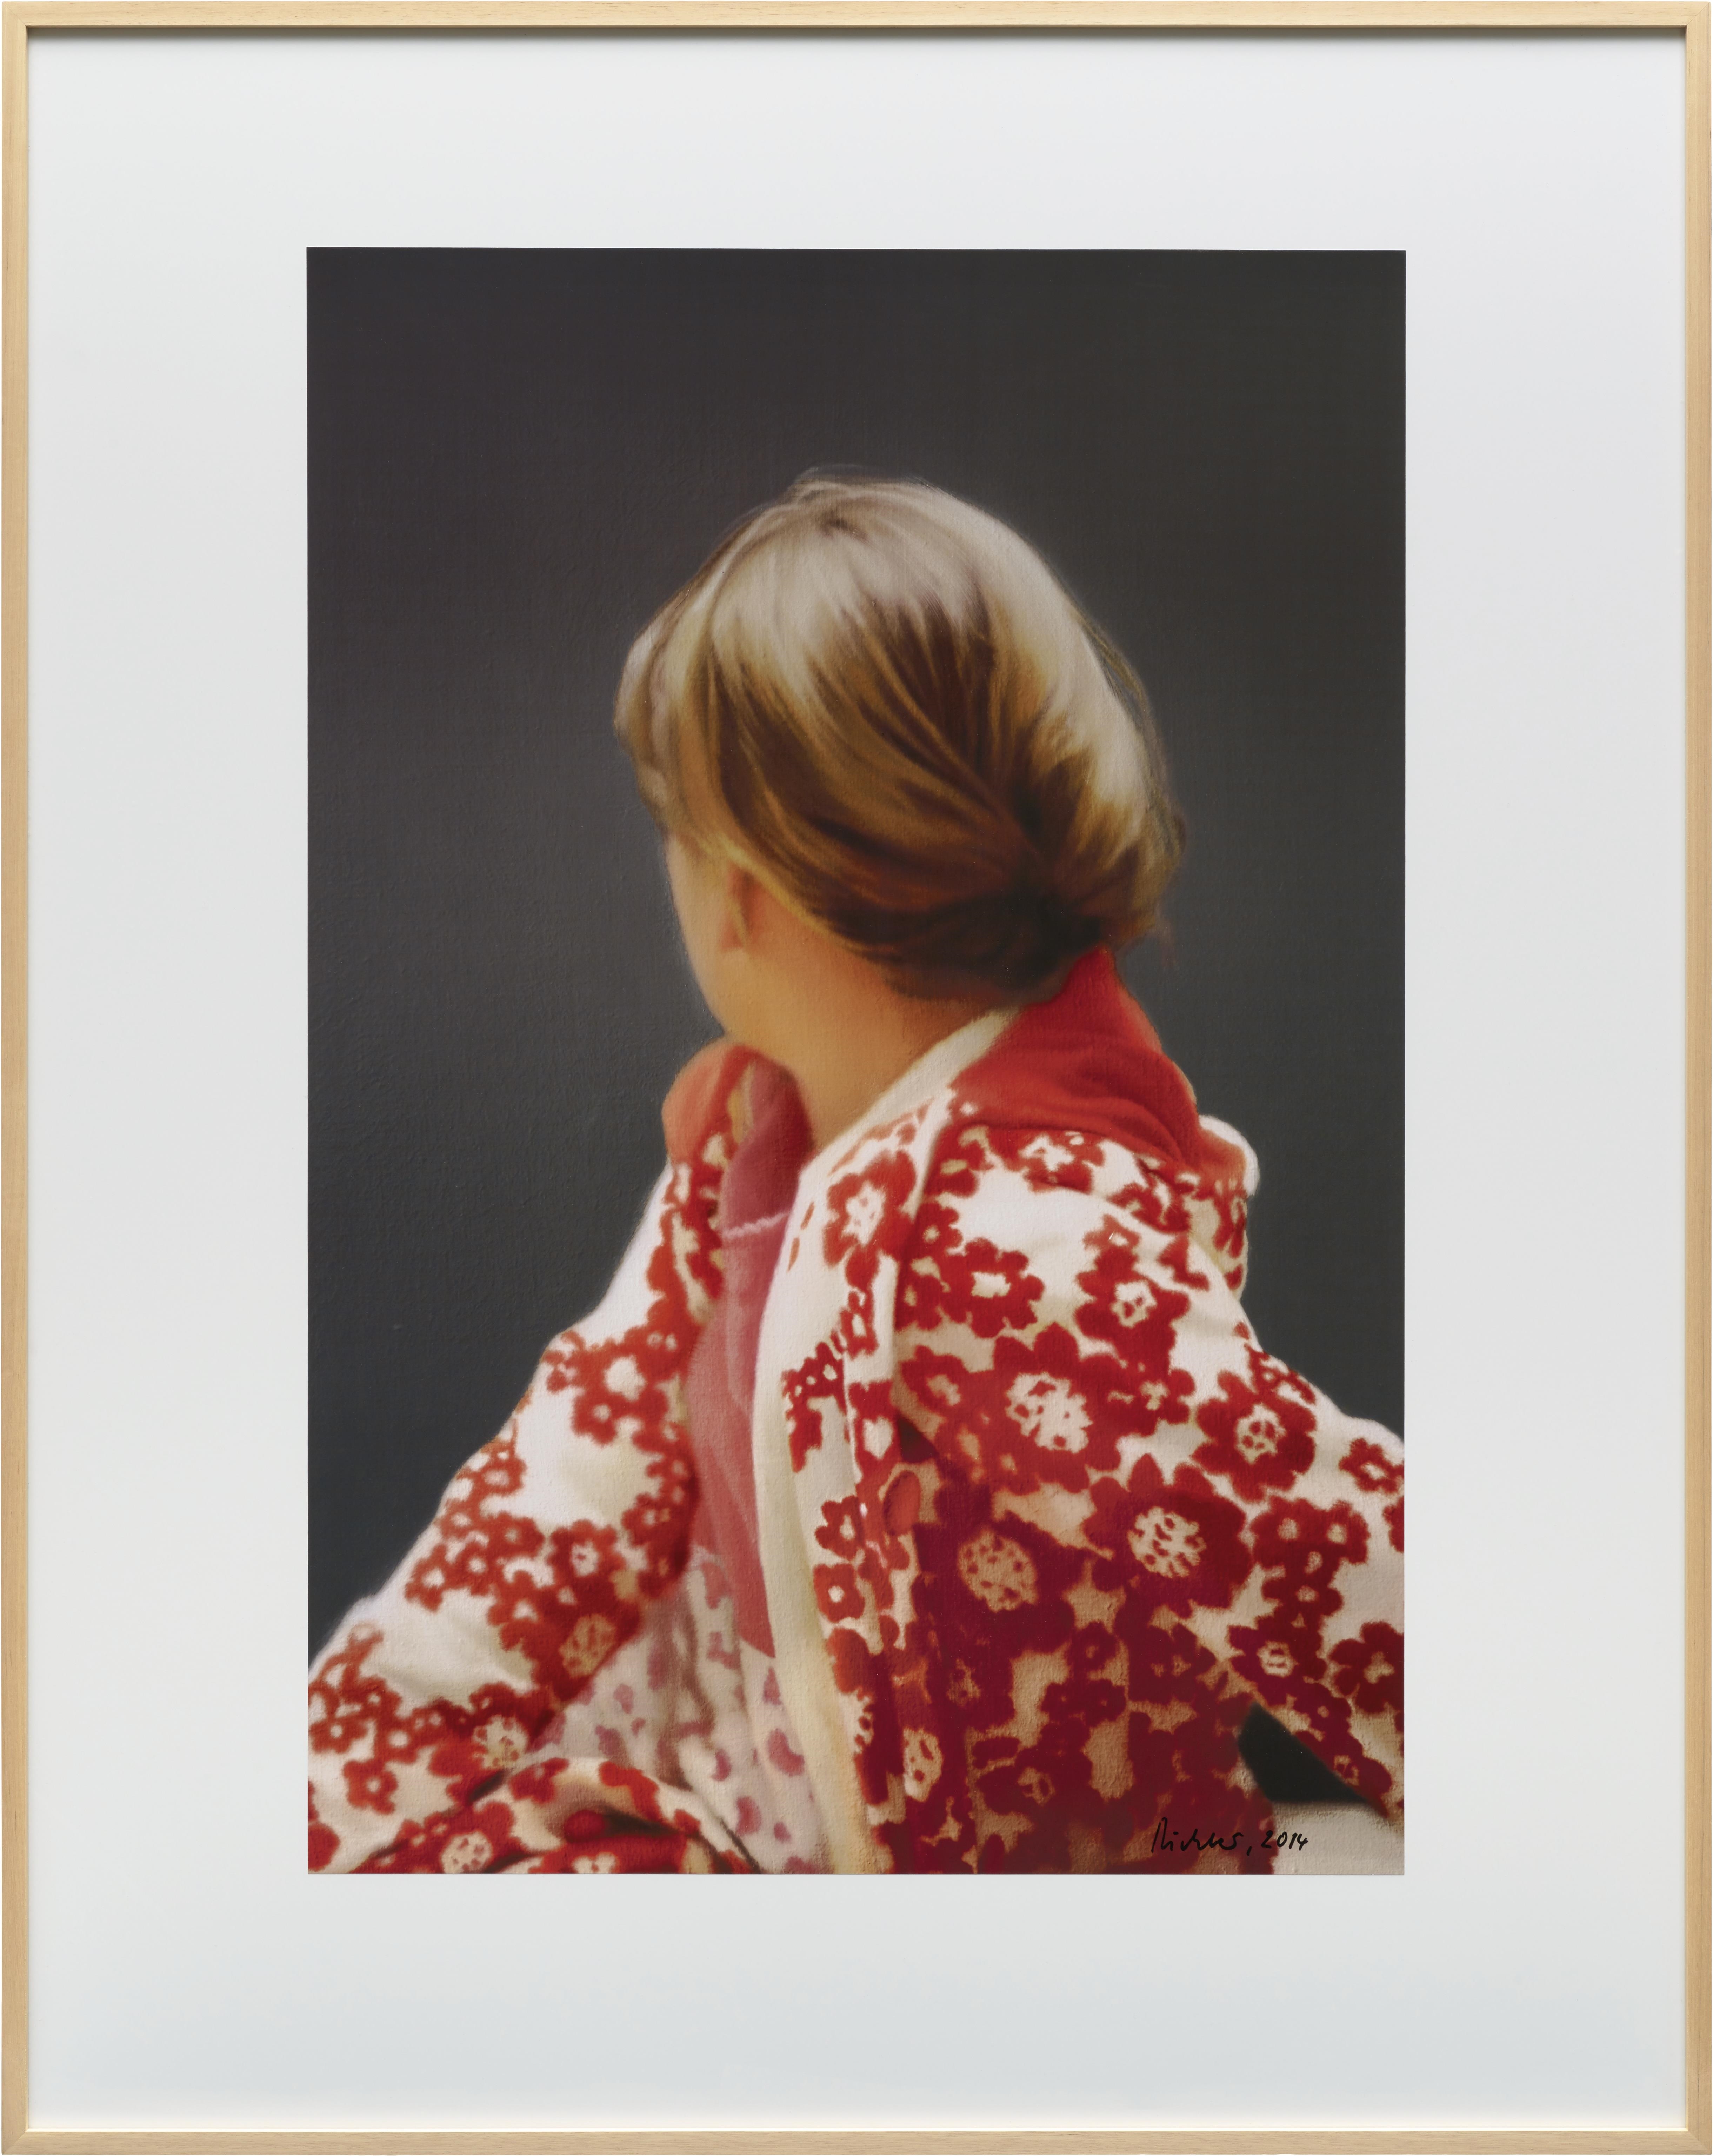 Artwork by Gerhard Richter, Betty, Made of Coloured offset print on lightweight white cardboard, covered with transparent lacquer laid down on white plastic board